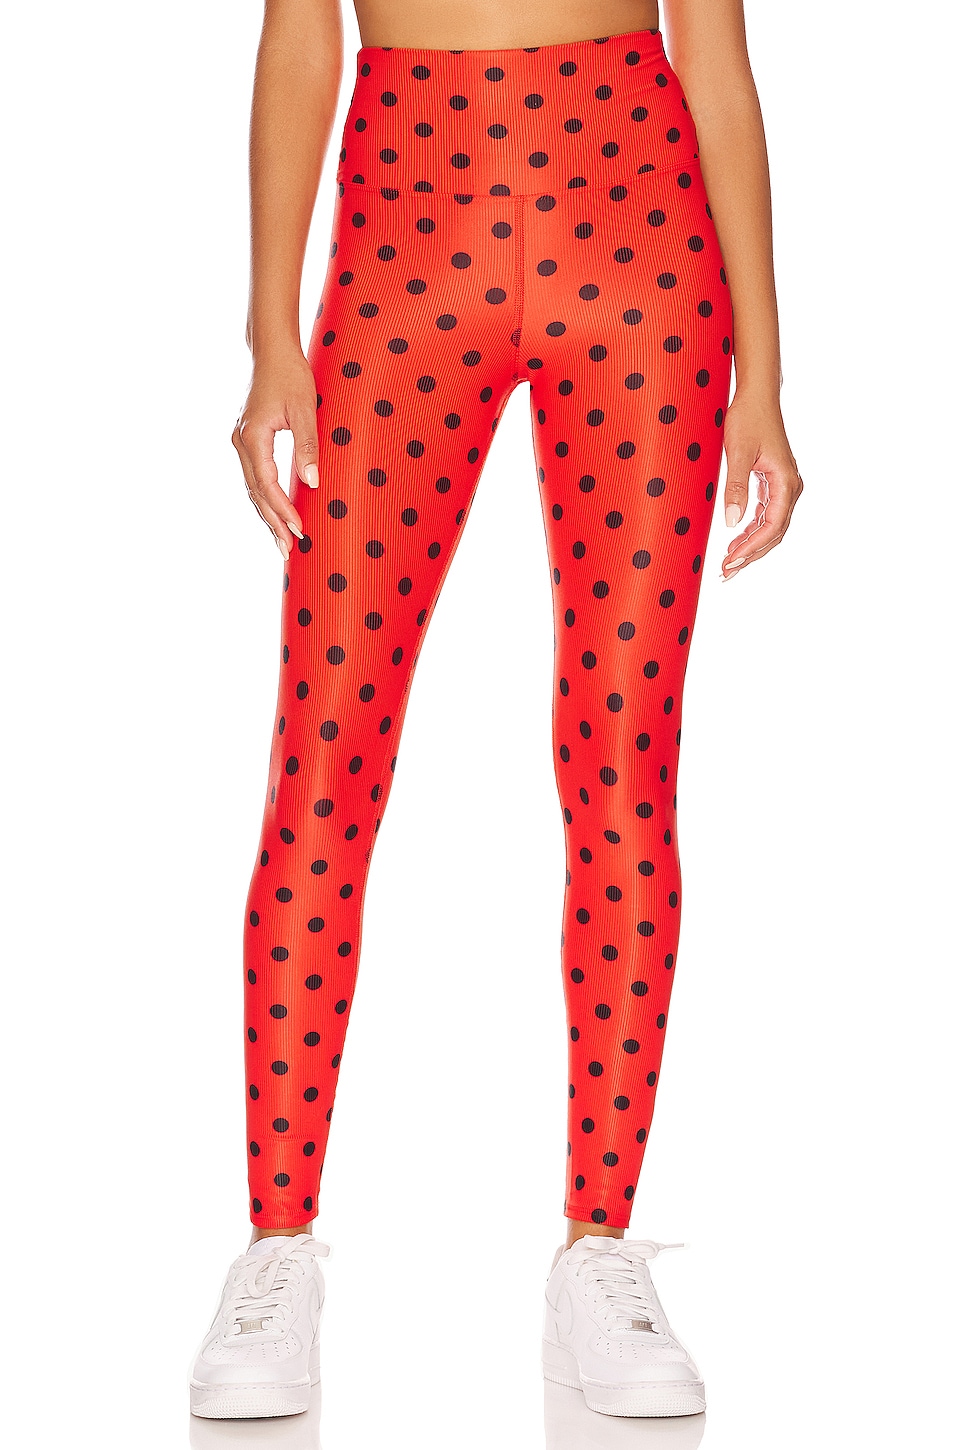 Women Casual Workout Fashion Red and White Polka Dot Stretch